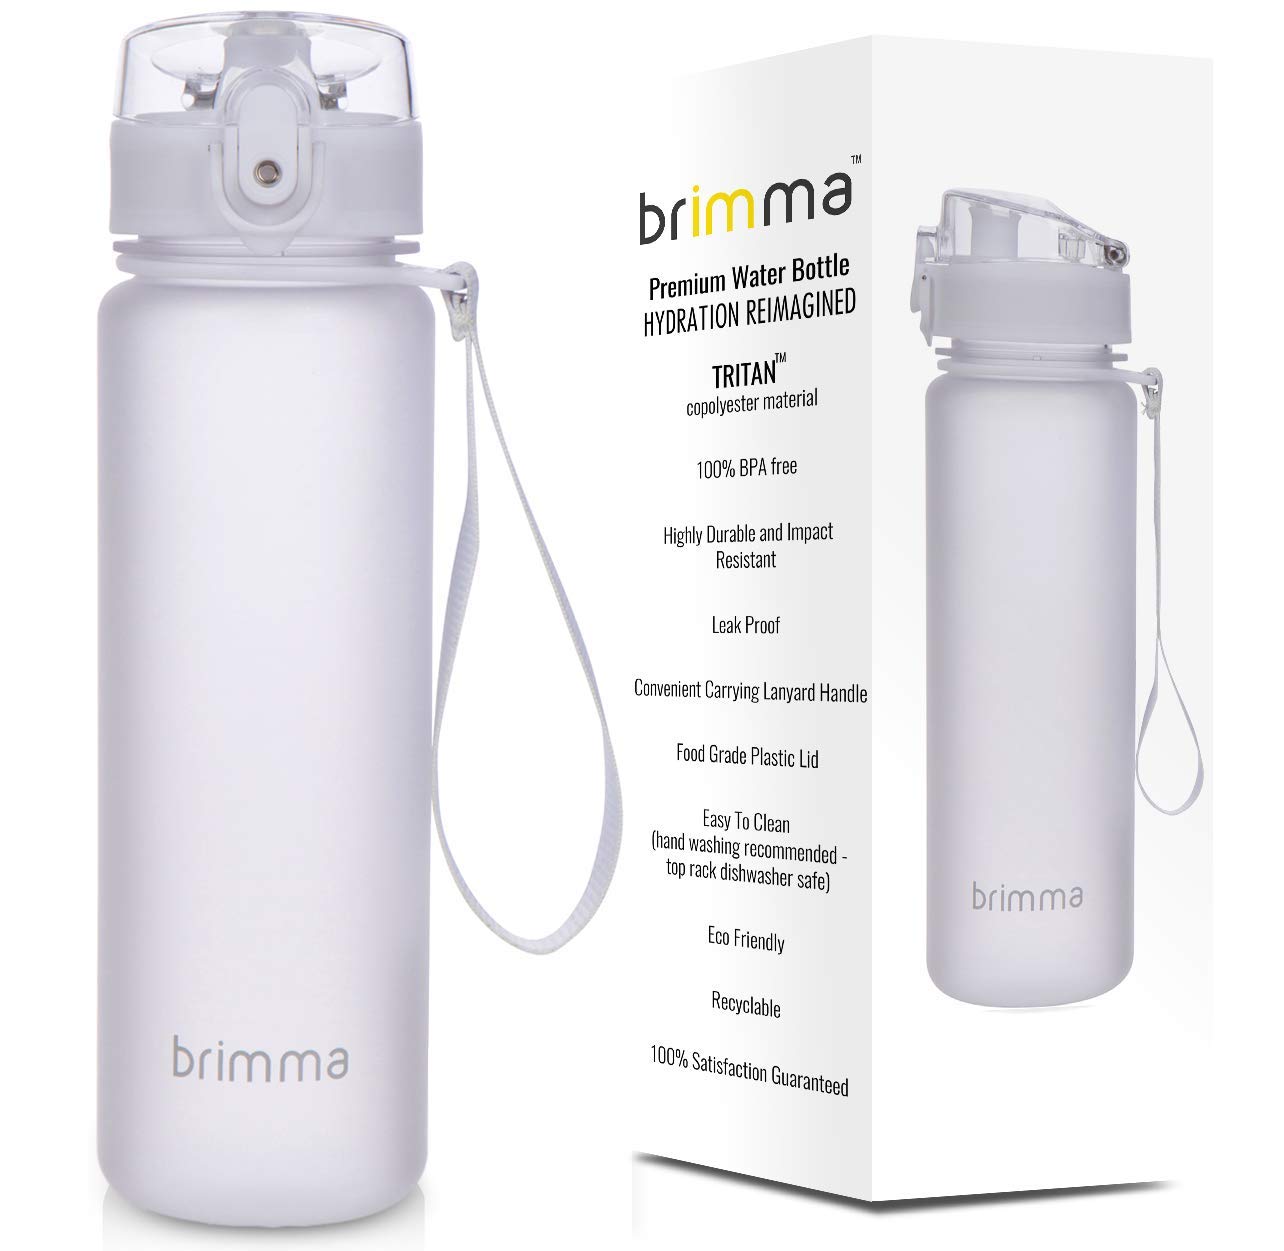 BPA Free Fitness Hydration Water Bottle : Great for Travel, Sports